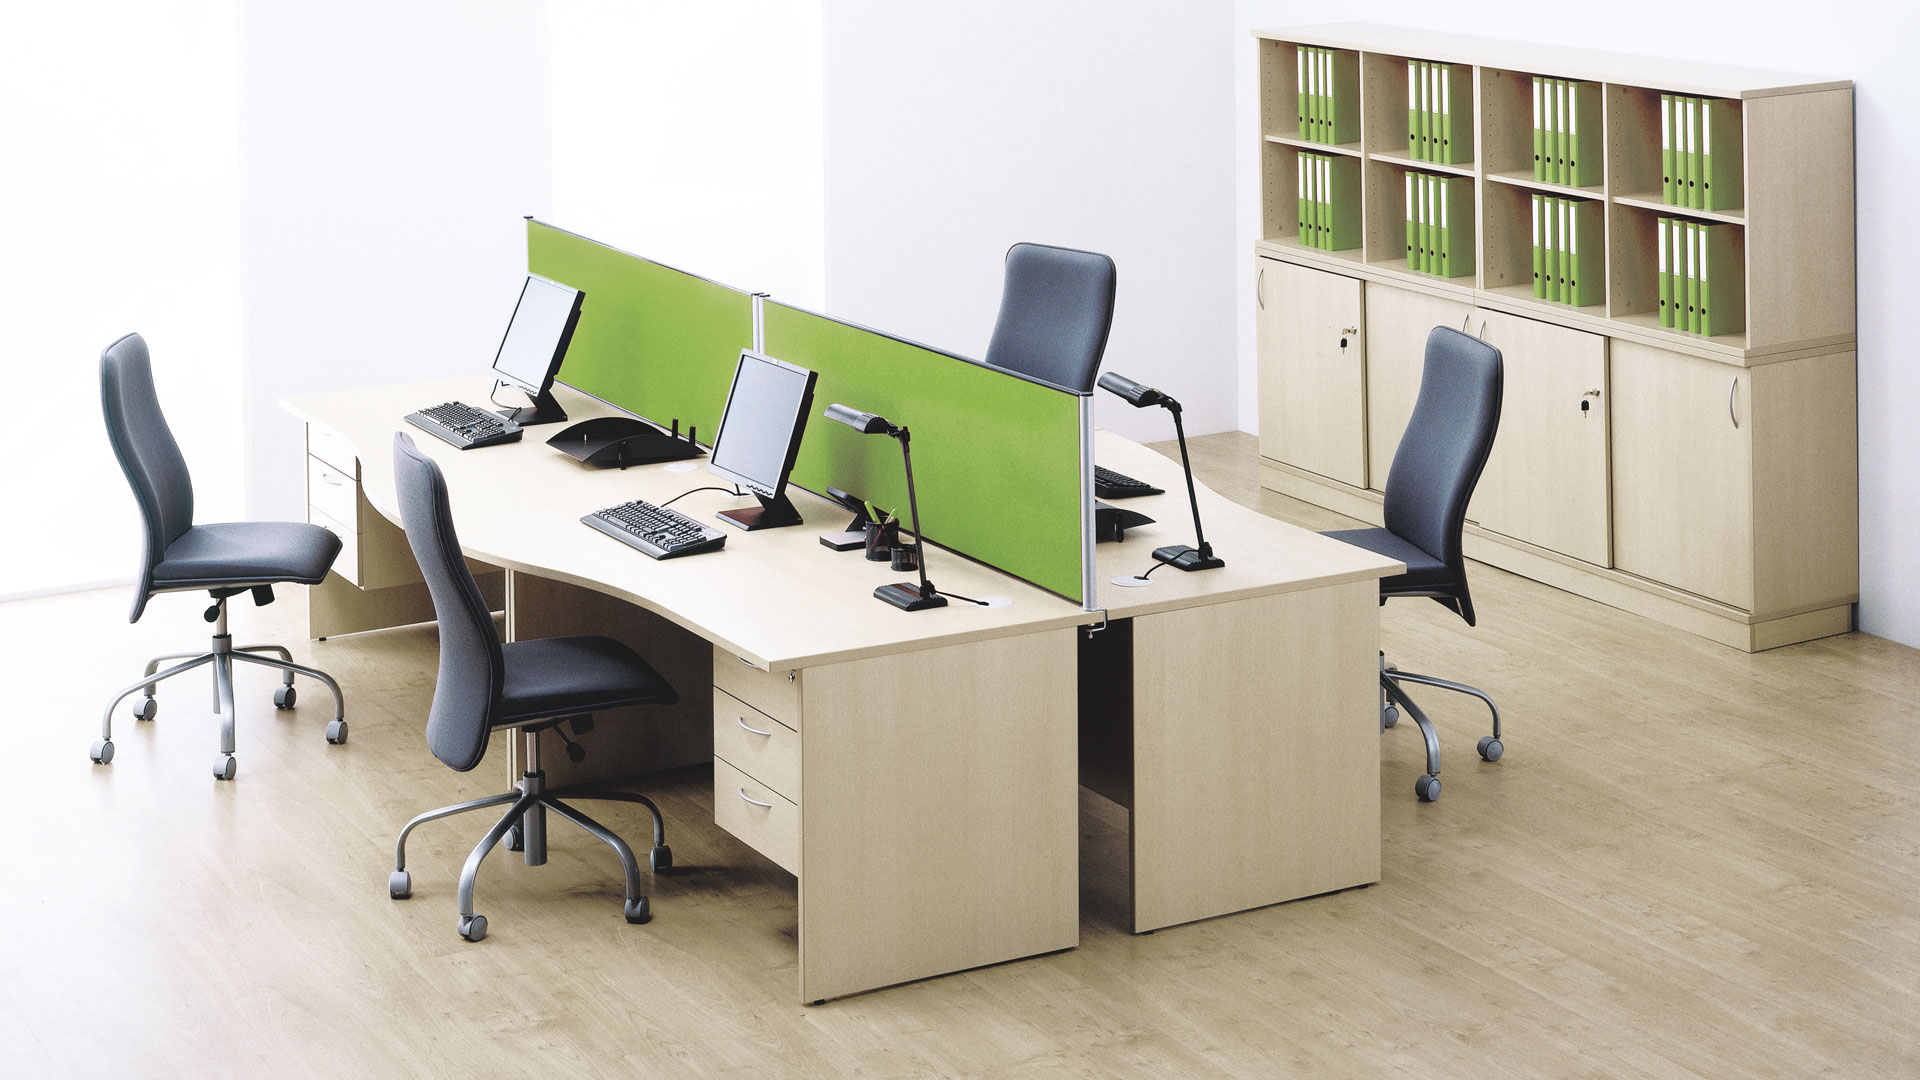 Optima Plus panel end desks with fabric divider screens